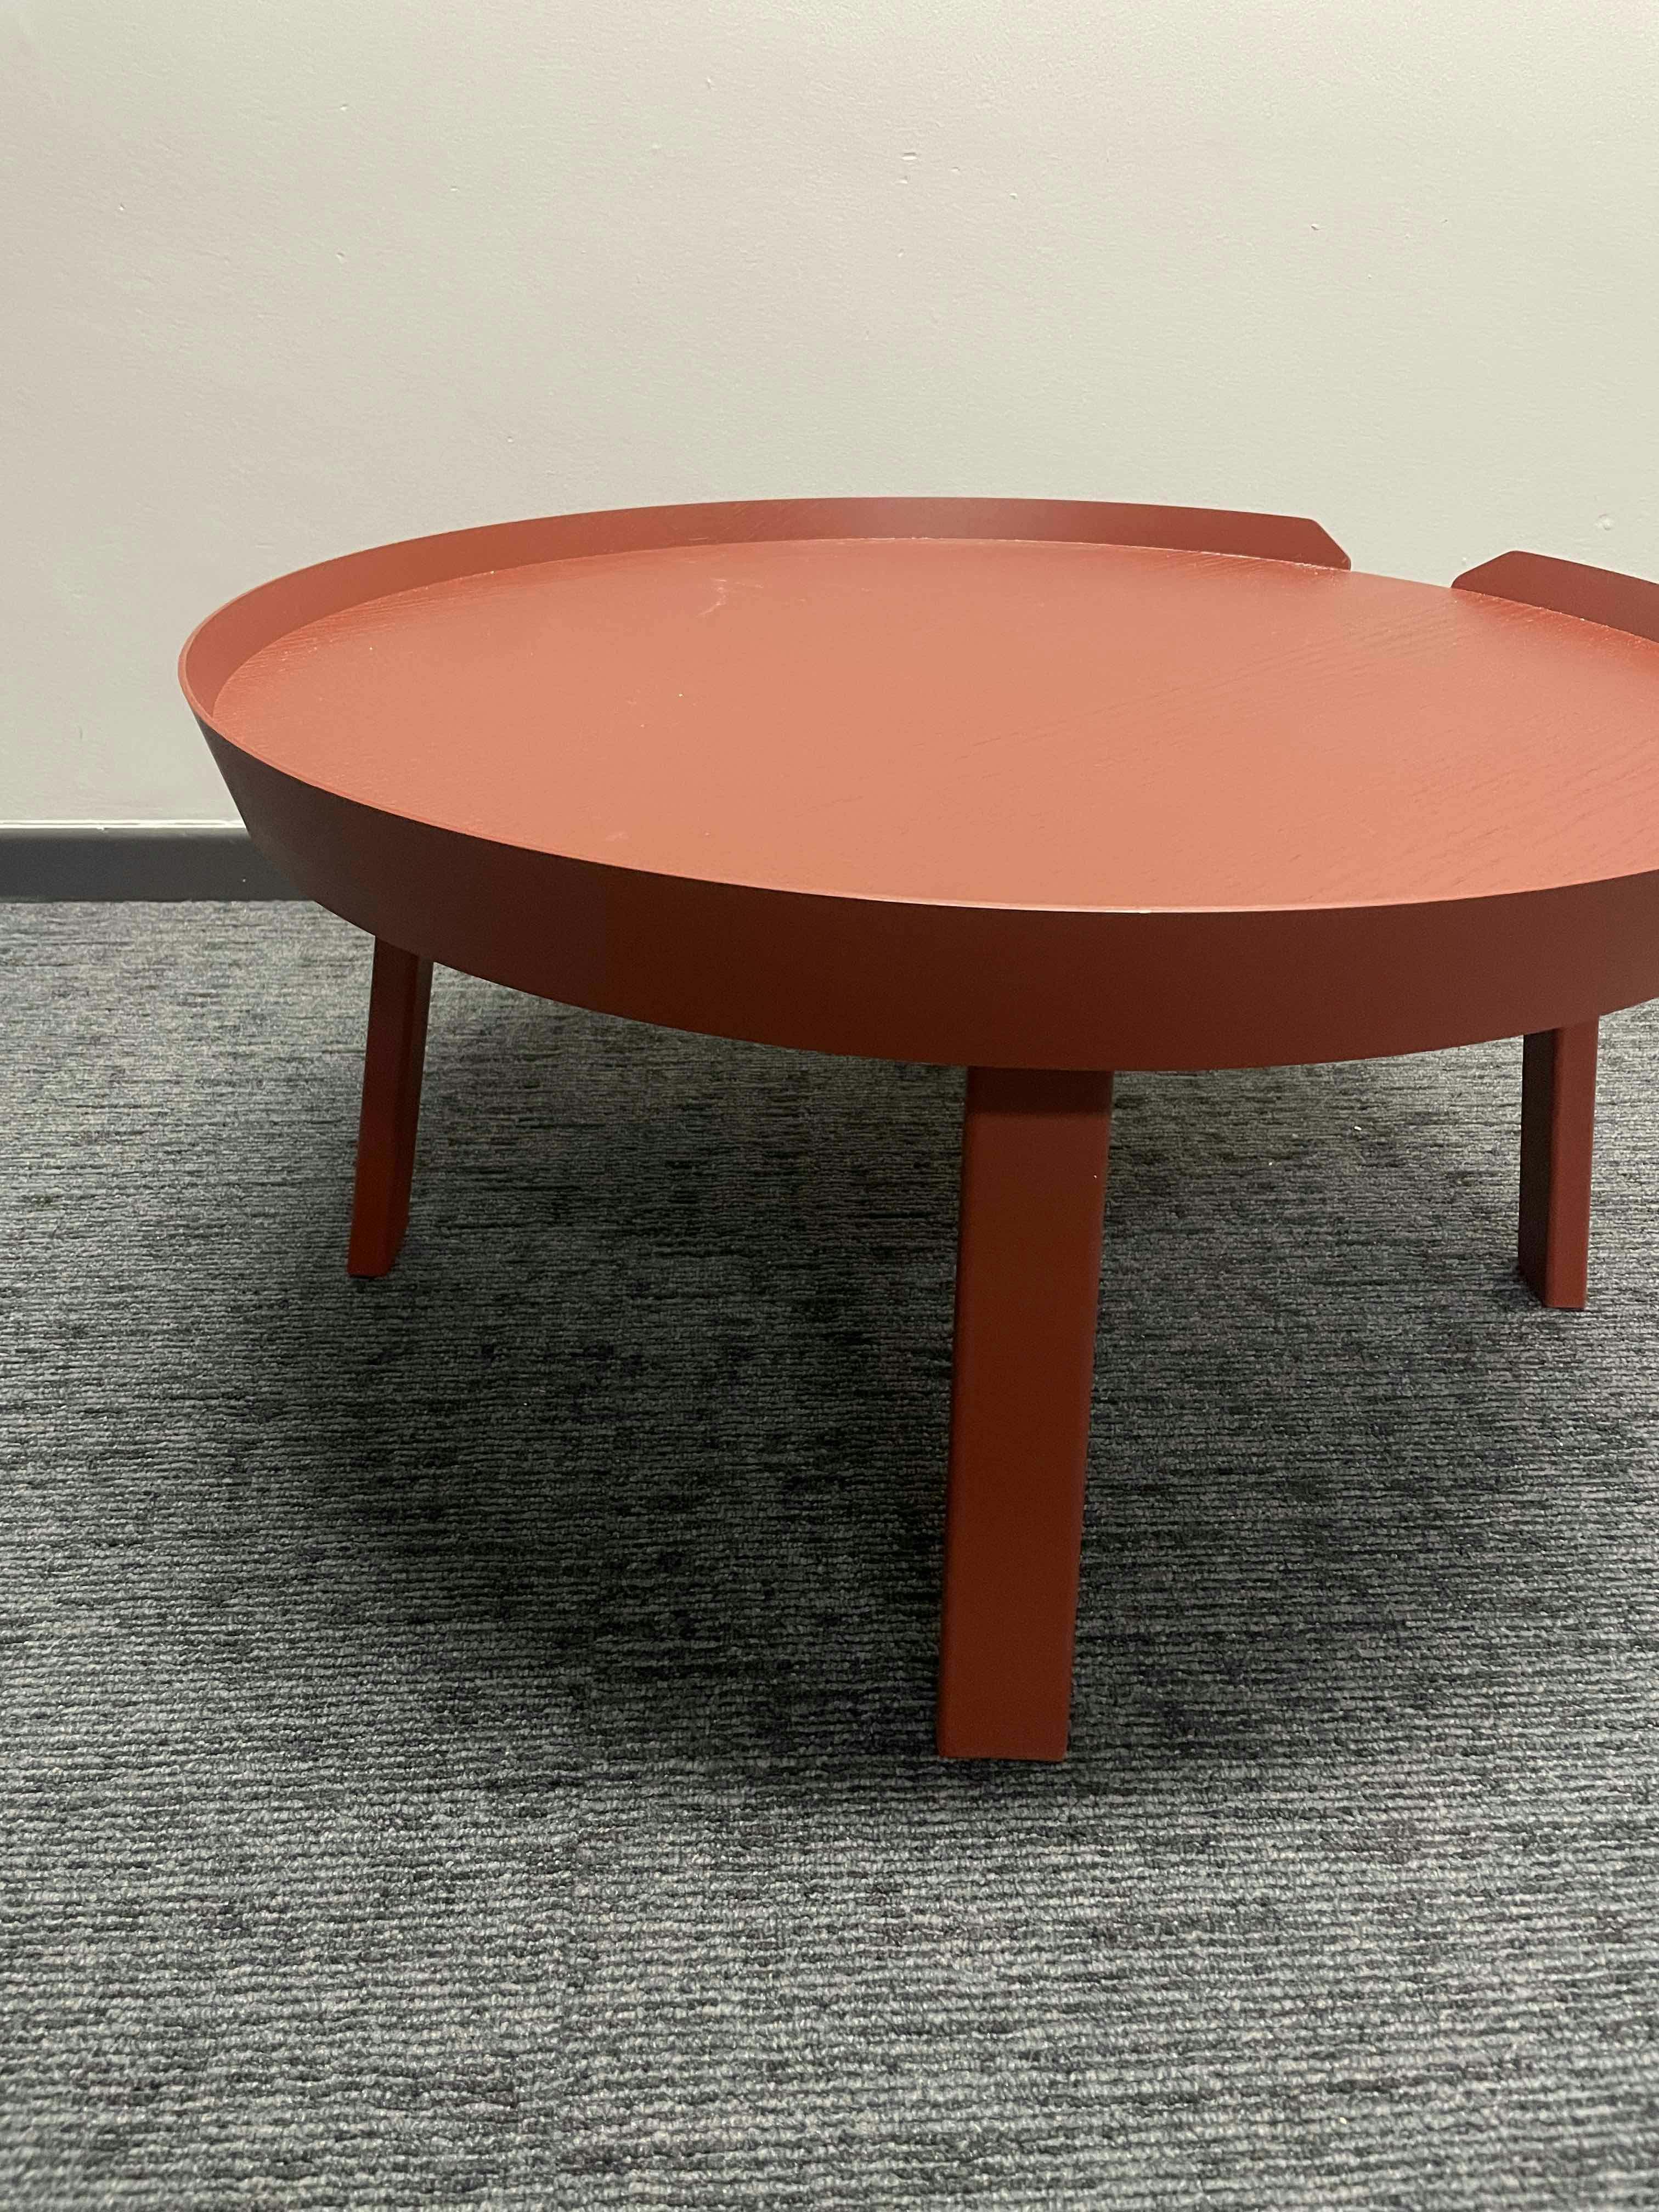 Table basse Muuto rouge bordeau - Second hand quality "Tables" - Relieve Furniture